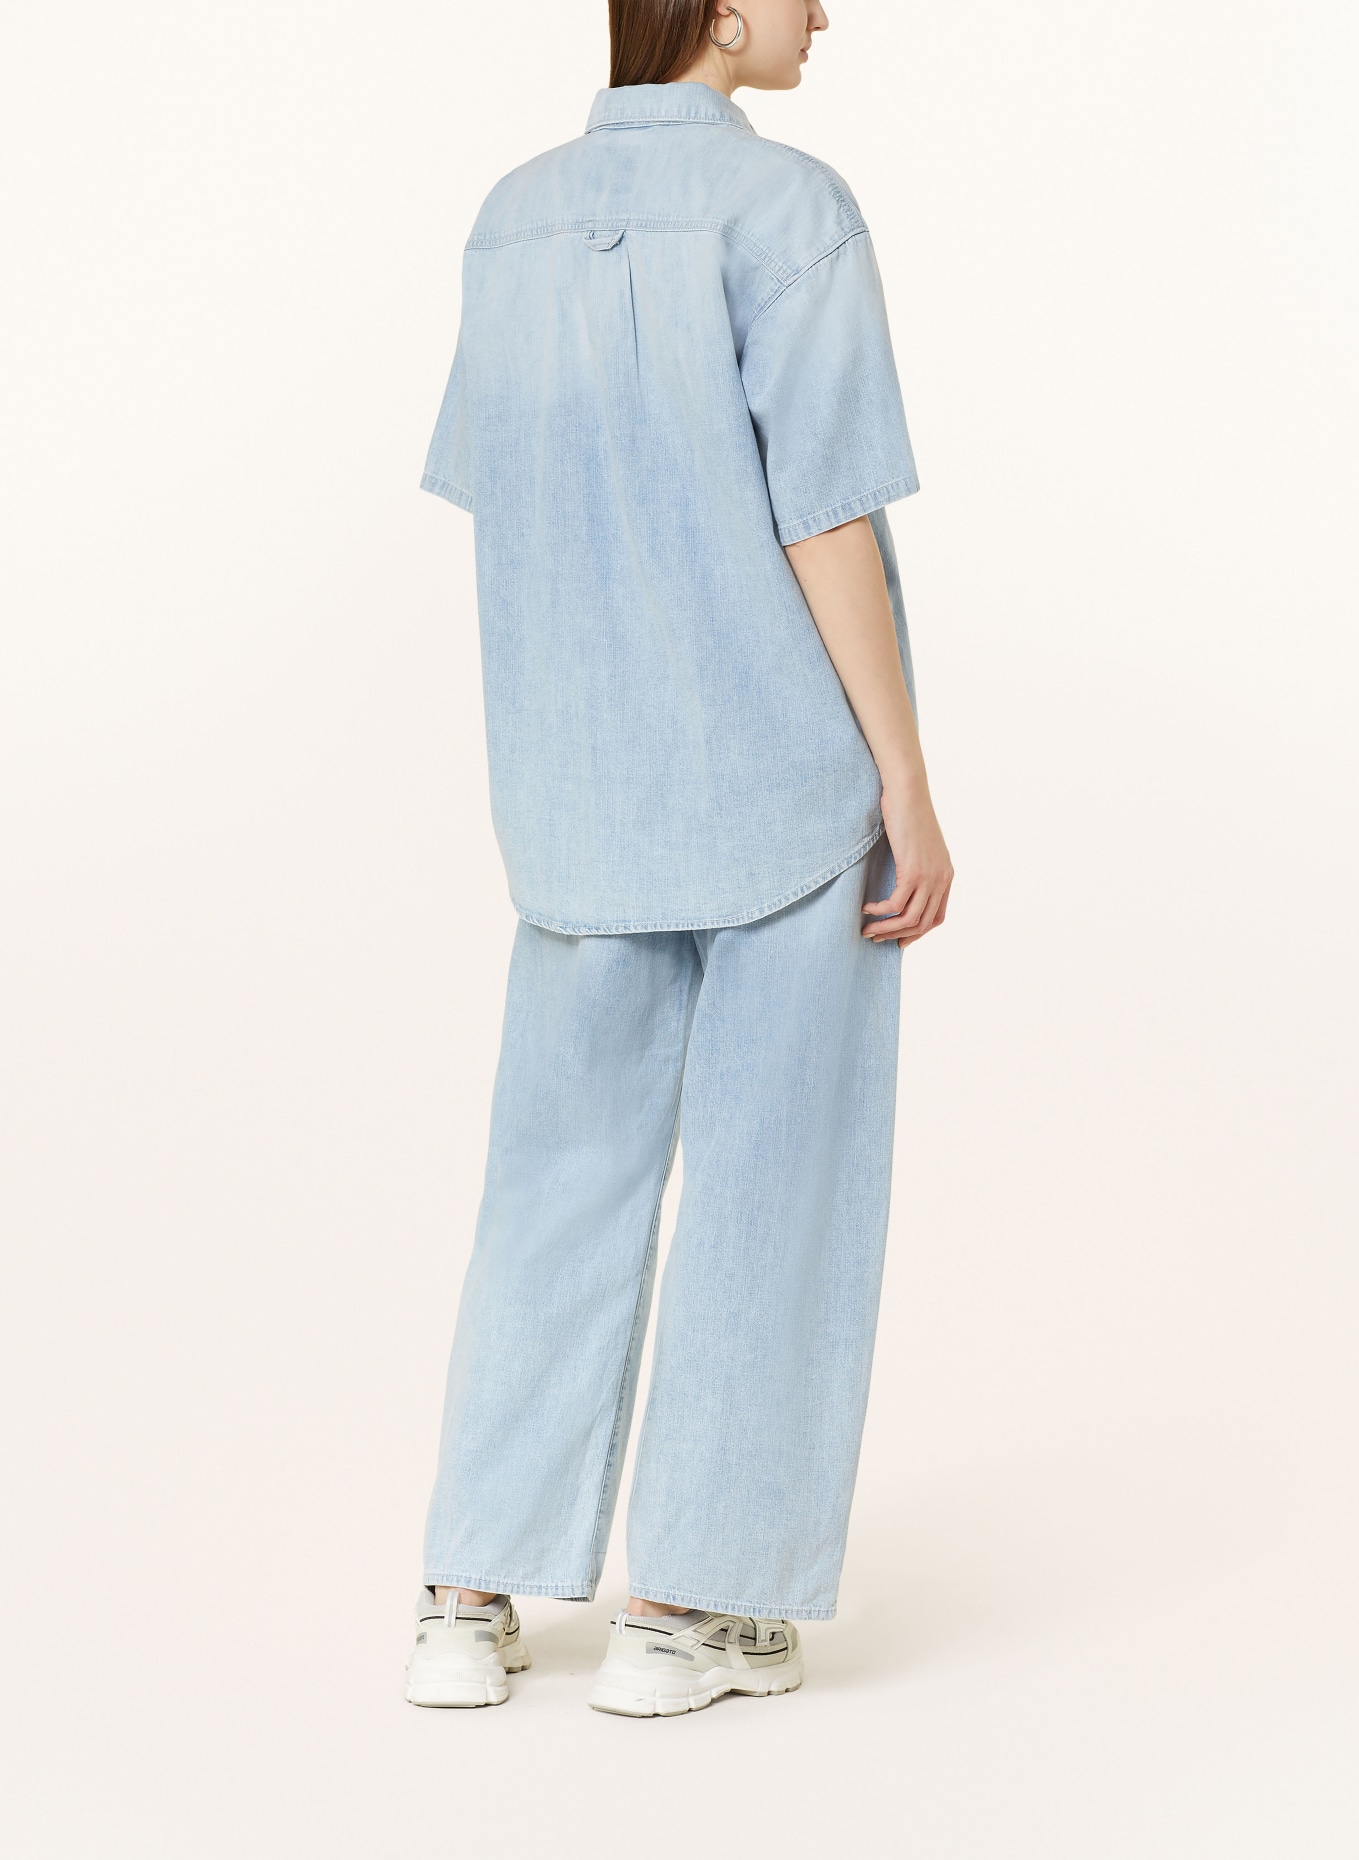 G-Star RAW Oversized denim blouse with 3/4 sleeves, Color: LIGHT BLUE (Image 3)